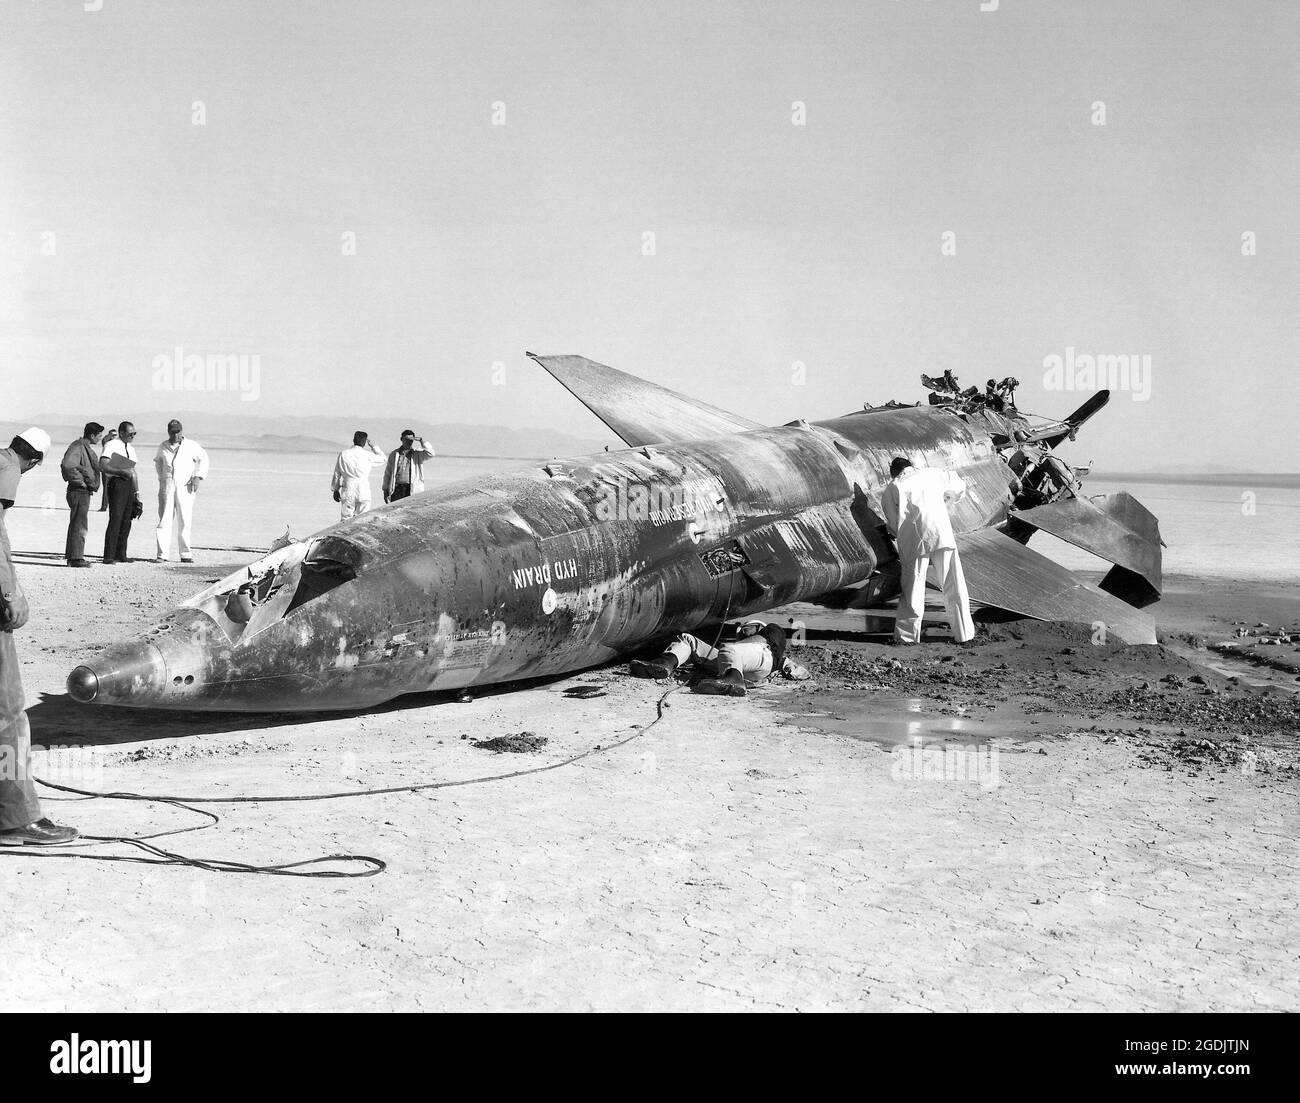 A X-15 rocket-powered plane on its back after a crash landing in at Mud Lake in Nevada on 9 November 1962 Stock Photo